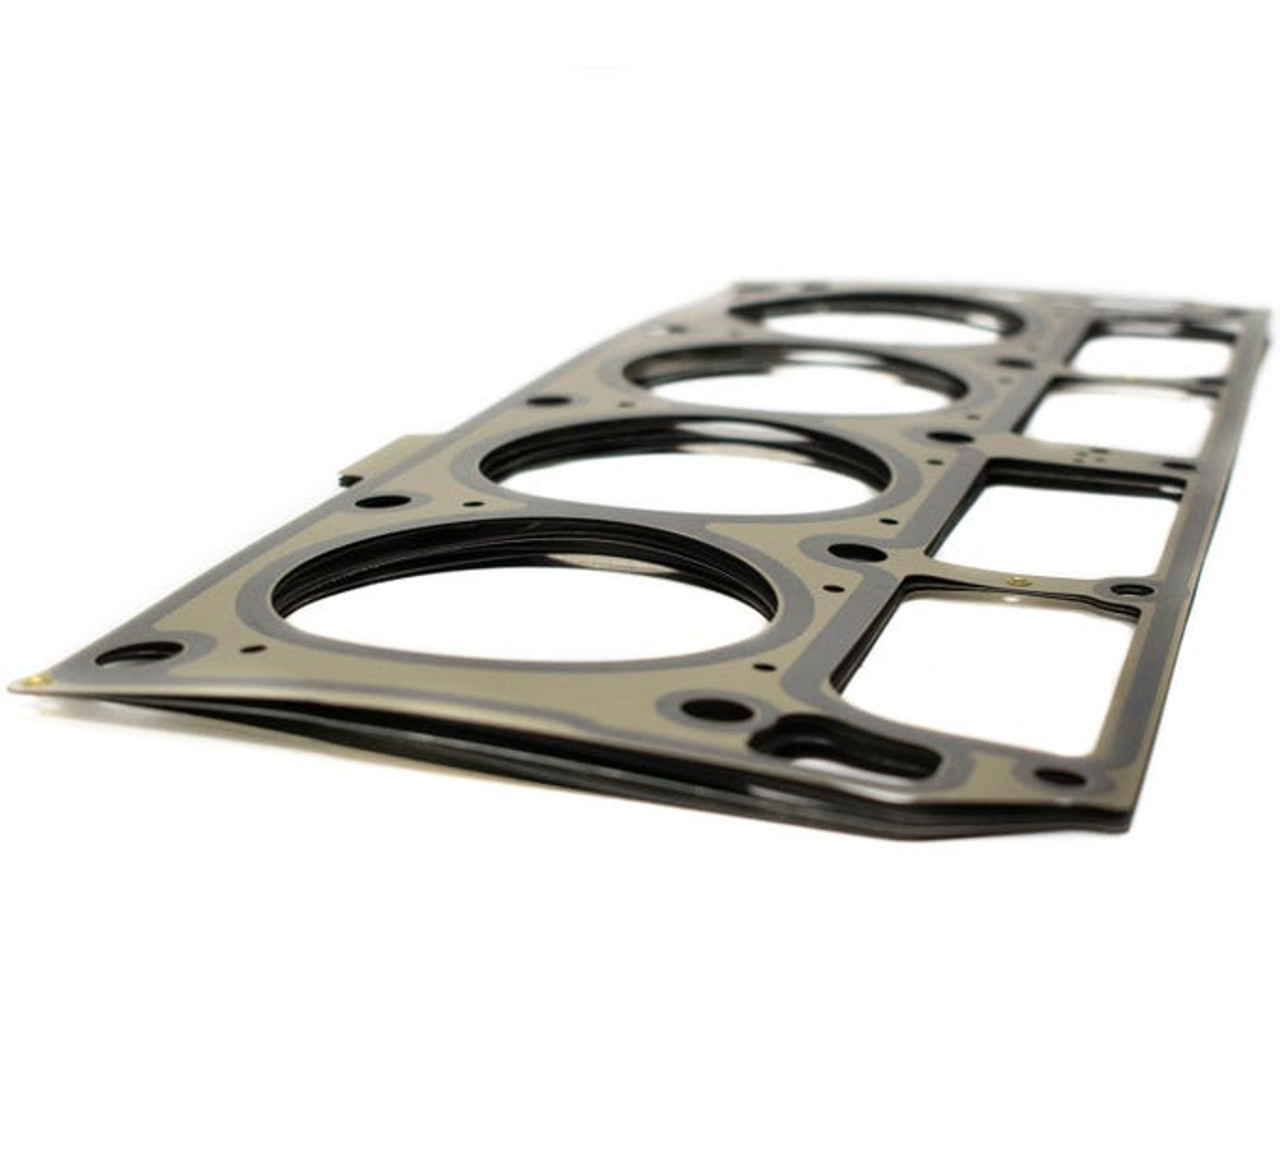 BTR SMALL BORE 7 LAYER HEAD GASKET - 3.940" BORE - .055" THICKNESS - SOLD INDIVIDUALLY - BTR973010